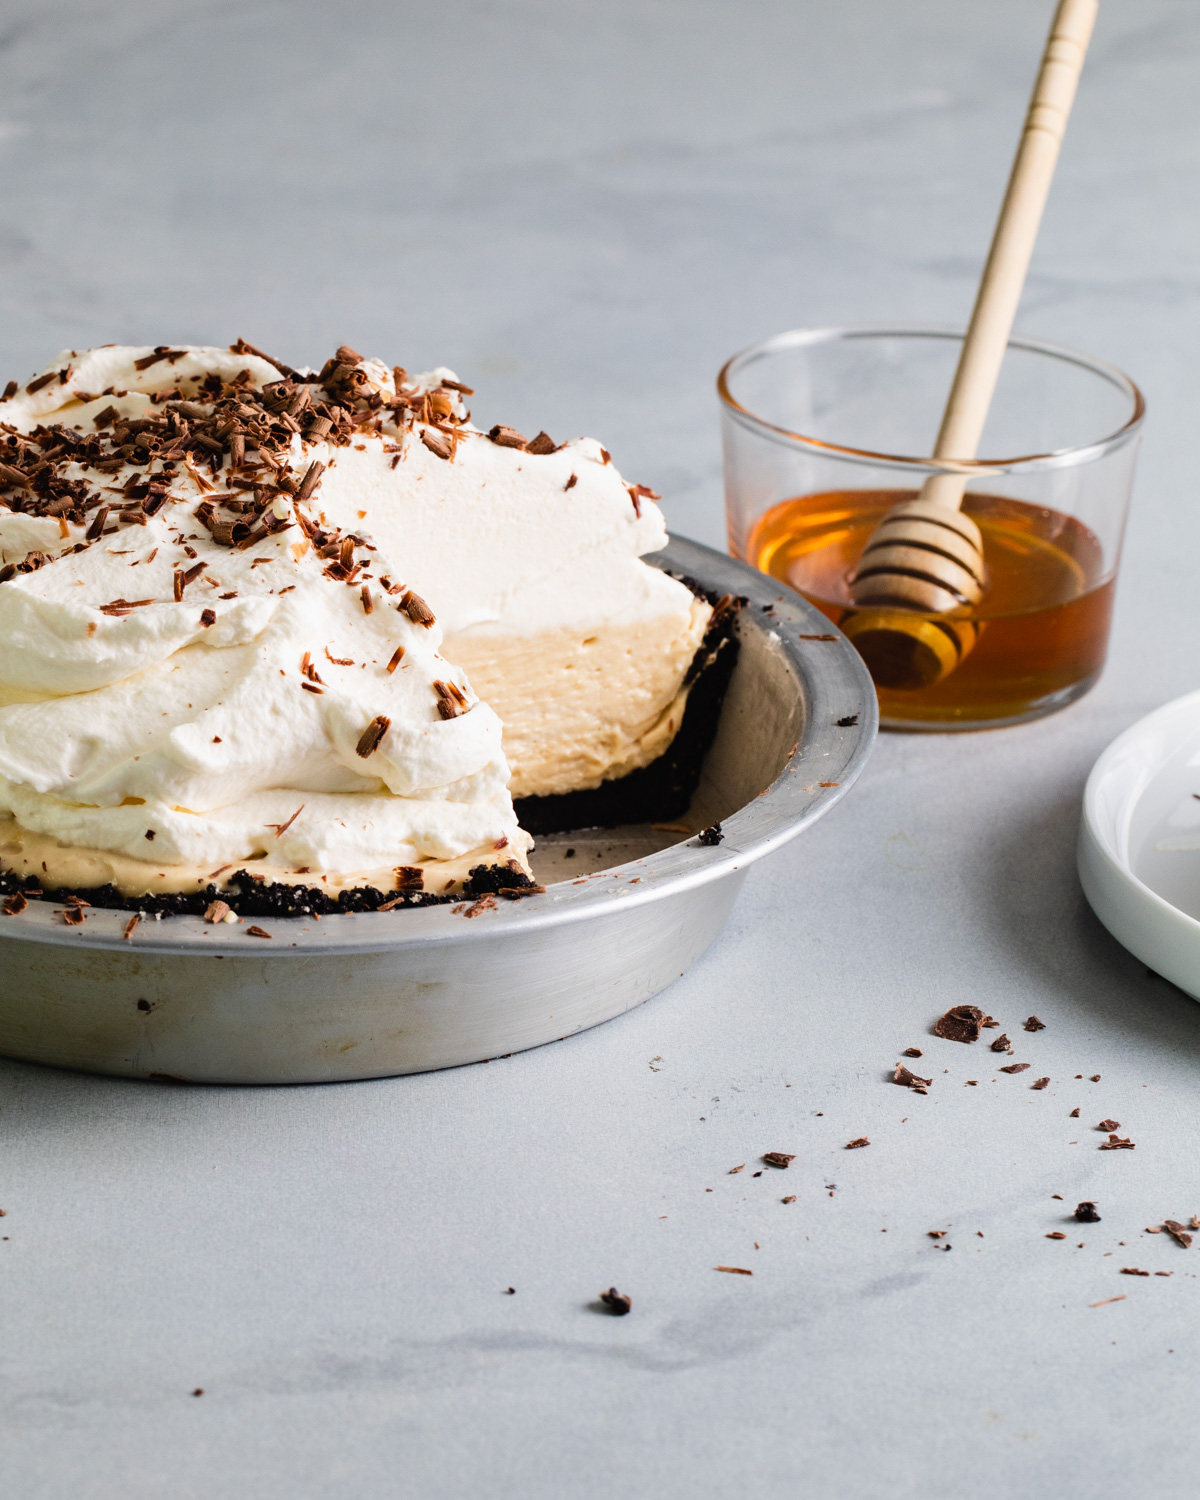 A no-bake peanut butter pie with whipped cream that's been sliced in its pie pan